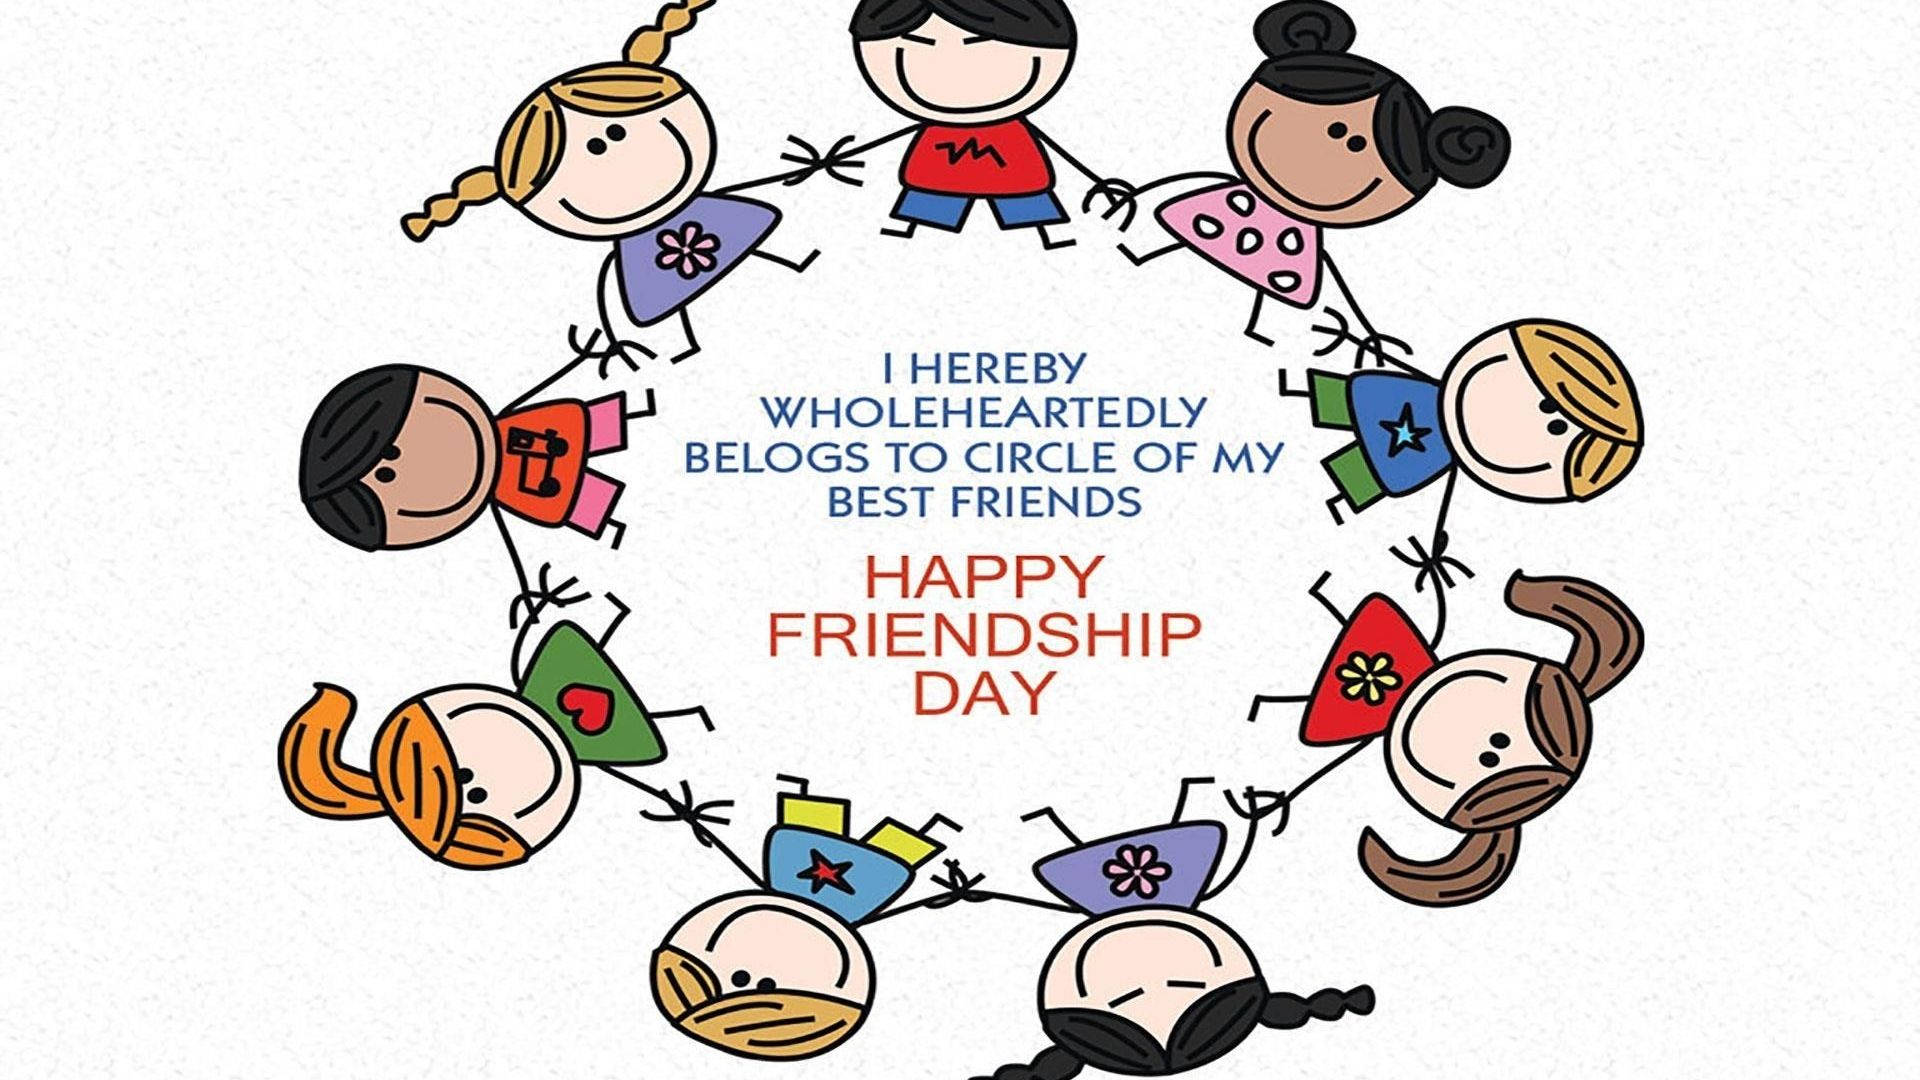 Kids Forming A Circle On Friendship Day Wallpaper